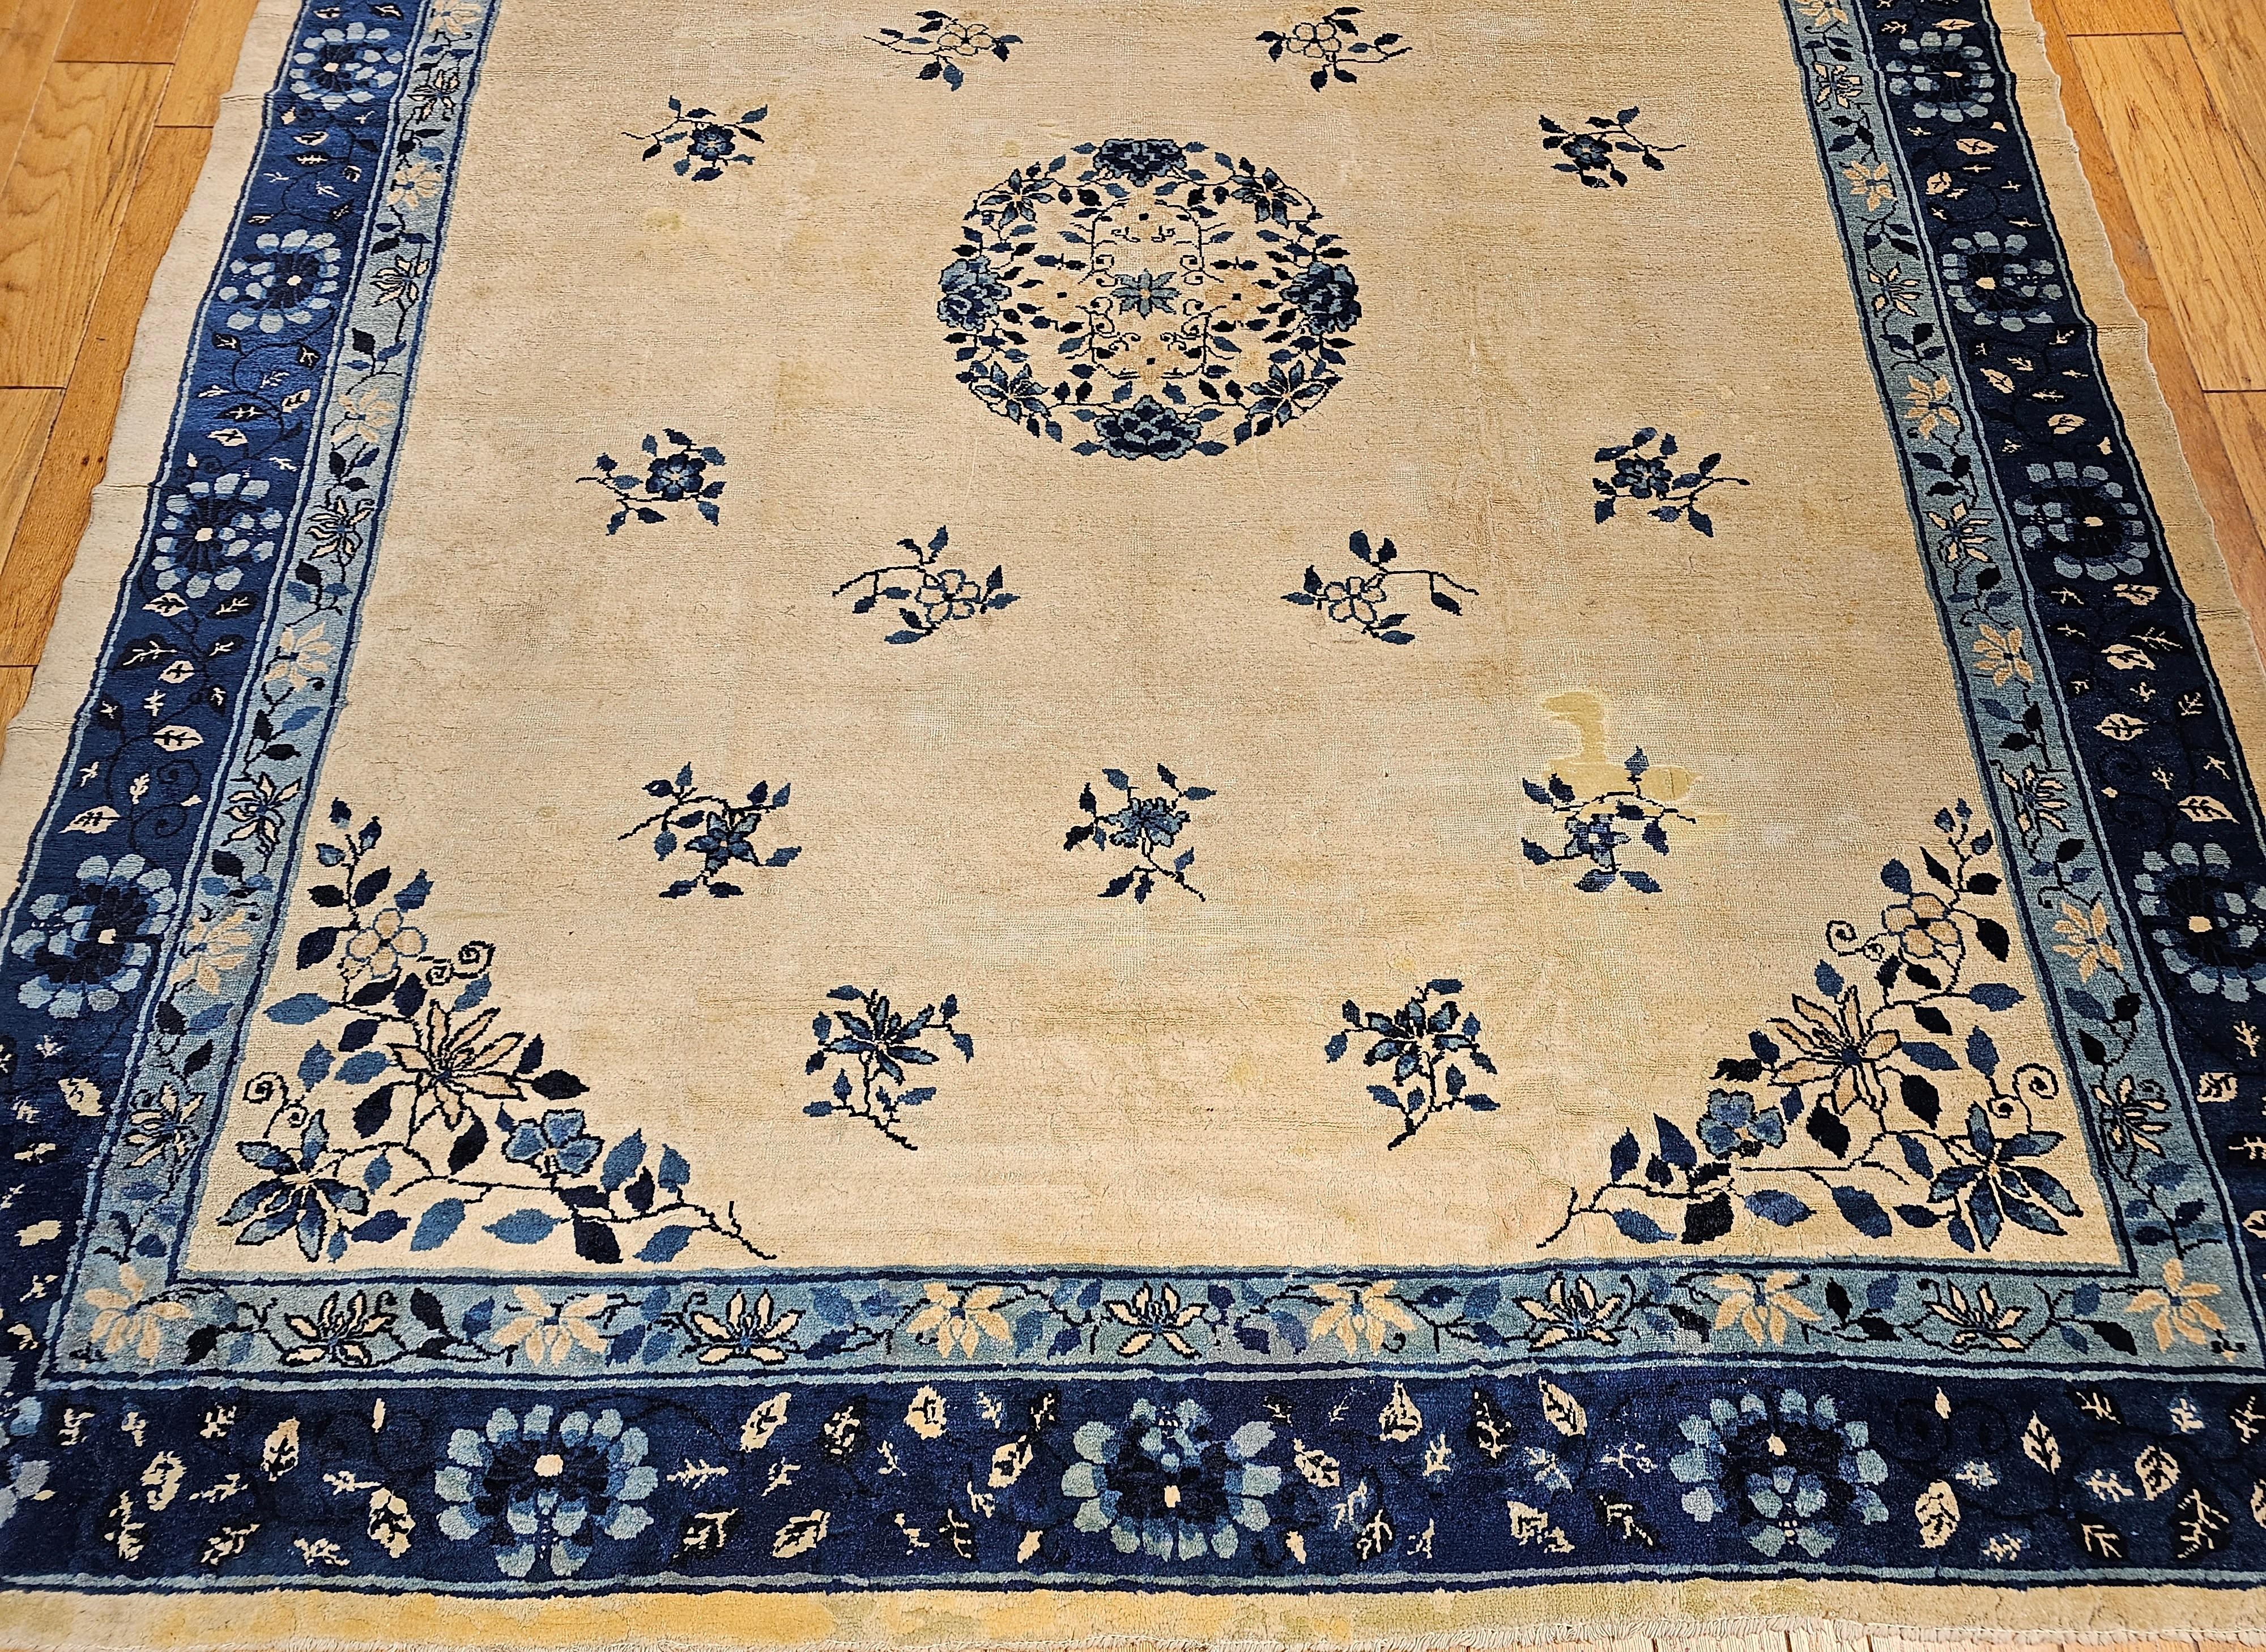 Vegetable Dyed 19th Century Room Size Chinese Peking Rug in Ivory, Navy, Baby Blue For Sale